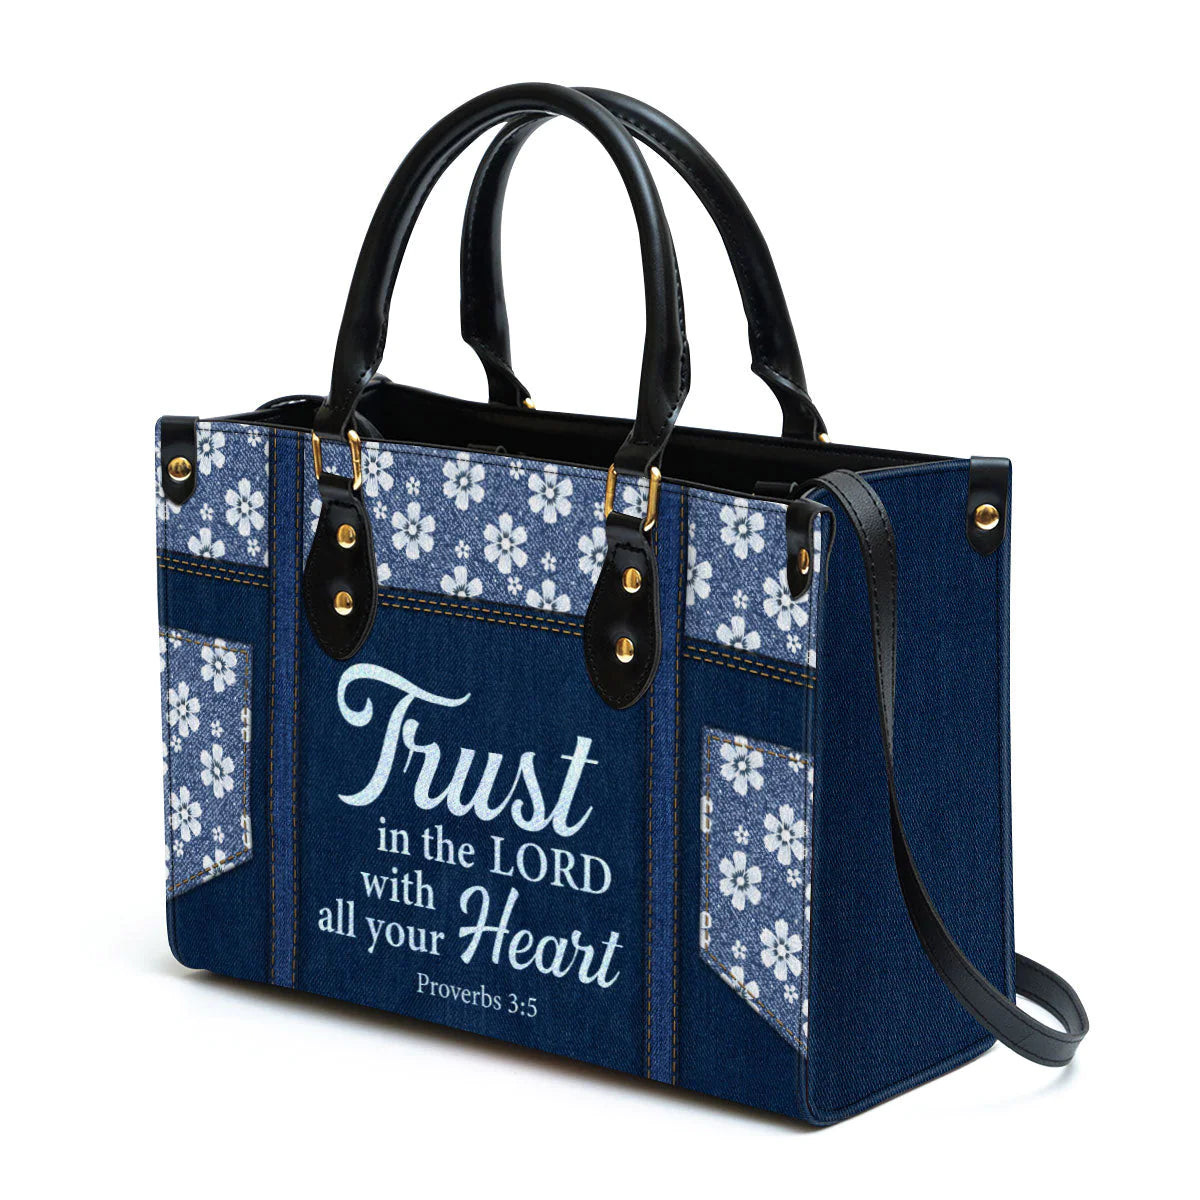 Christianart Handbag, Trust In The Lord With All Your Heart, Personalized Gifts, Gifts for Women. - Christian Art Bag